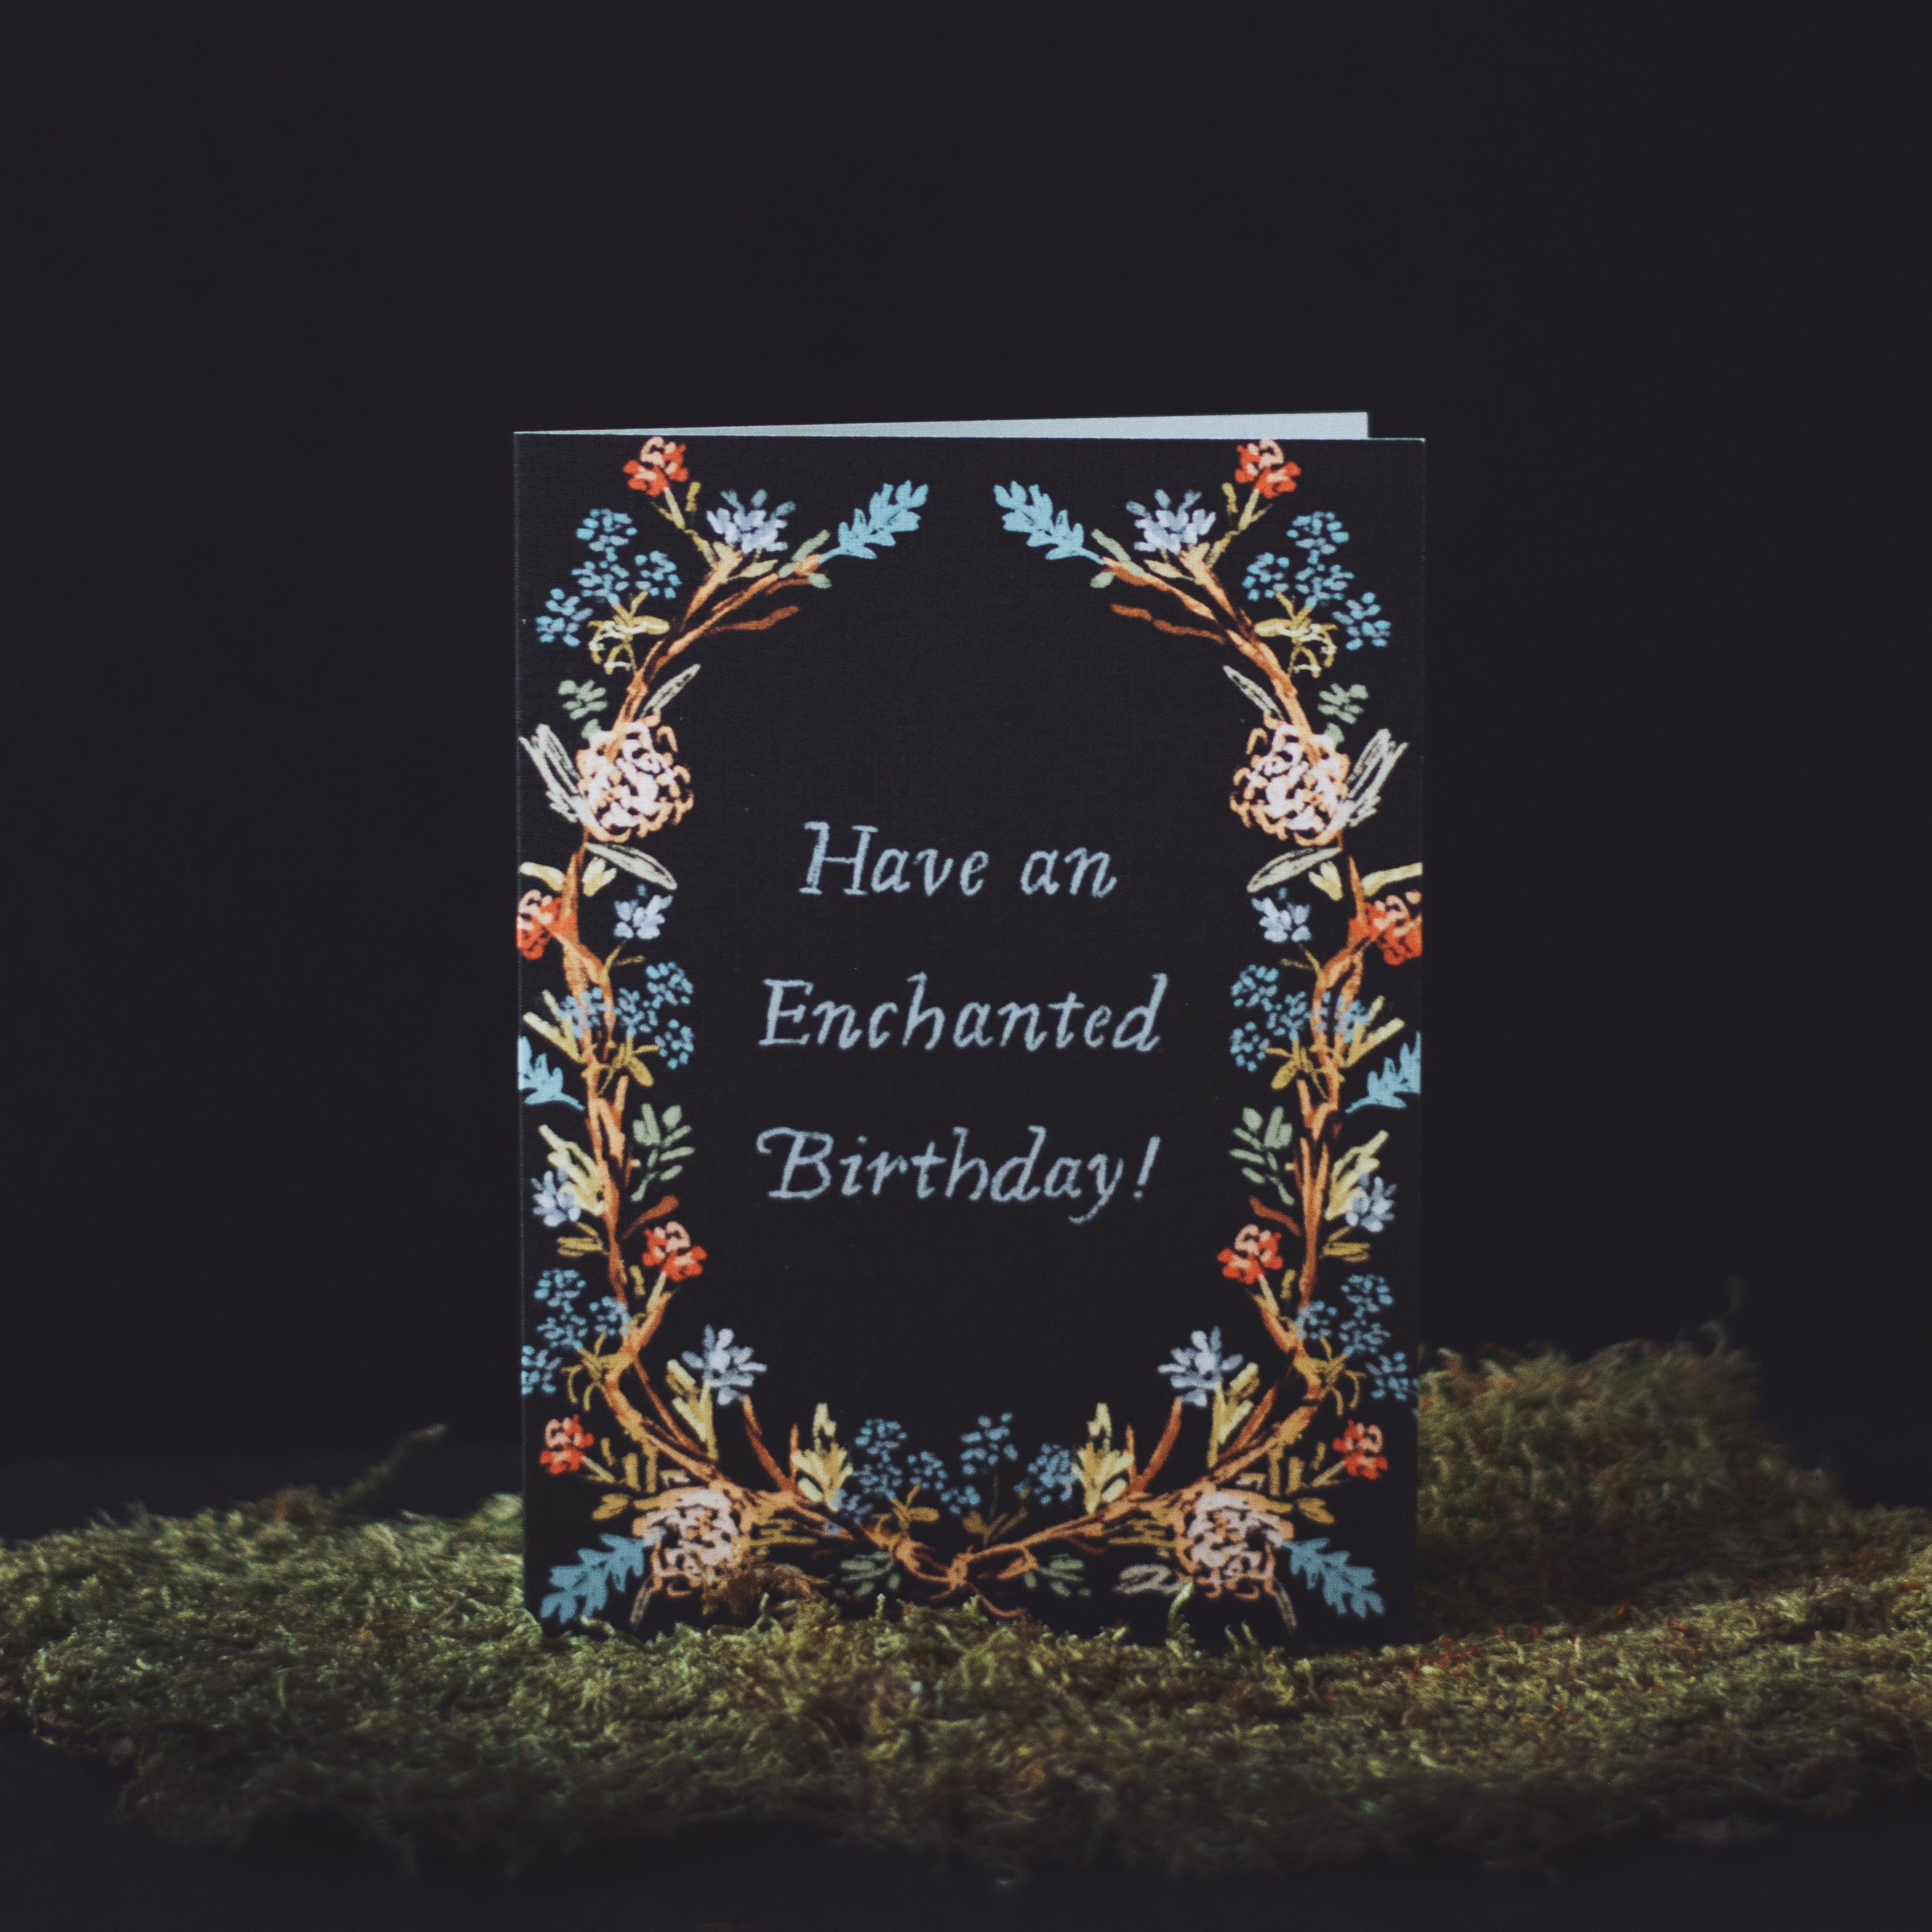 Have an Enchanted Birthday!